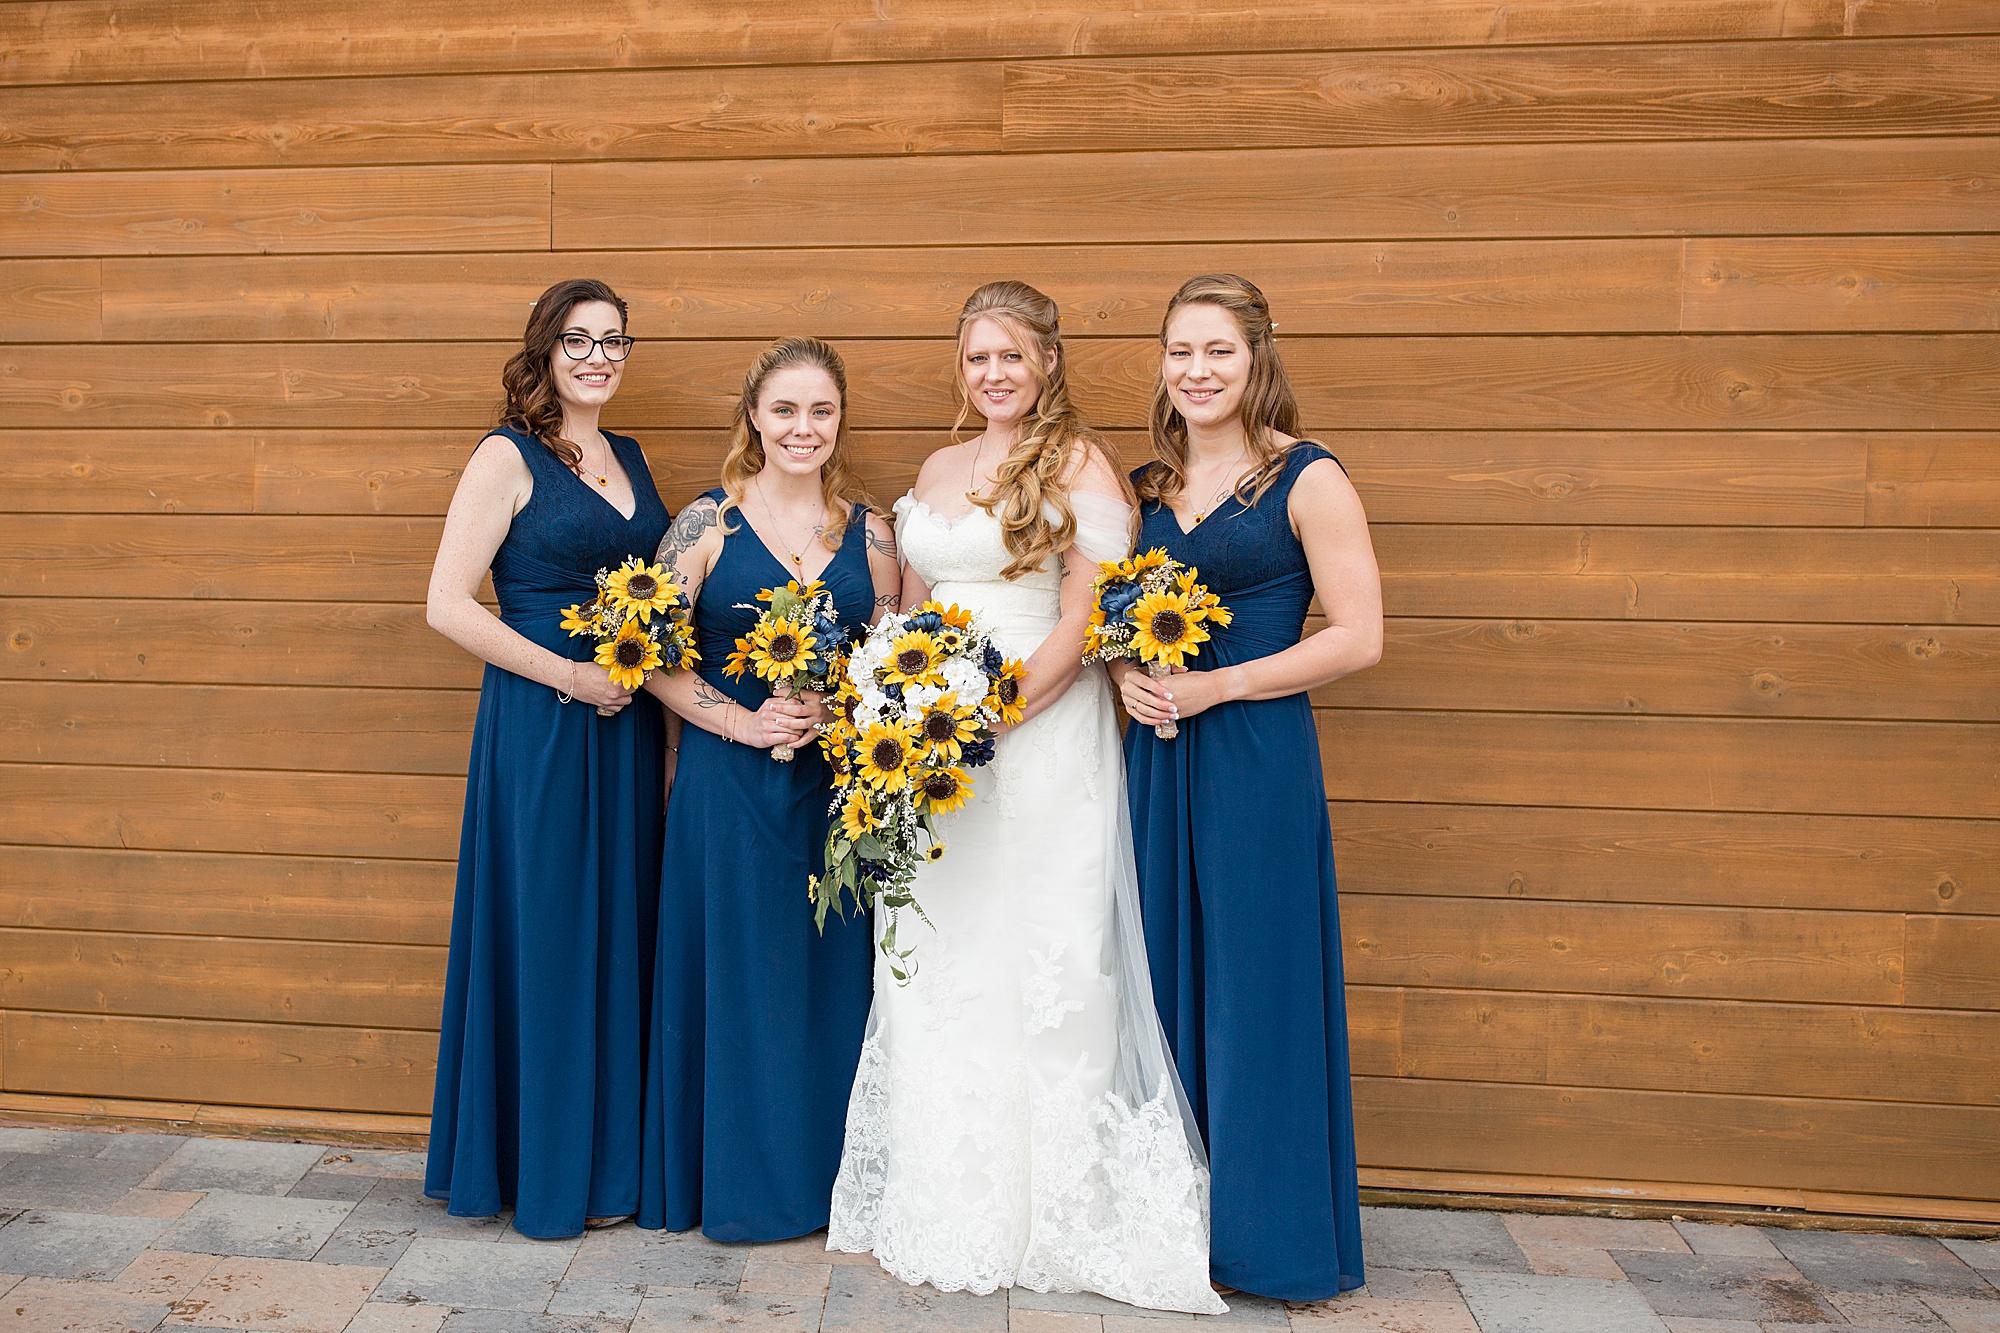 bride and bridesmaids in navy gowns with sunflowers pose outside Quail Ridge Lodge